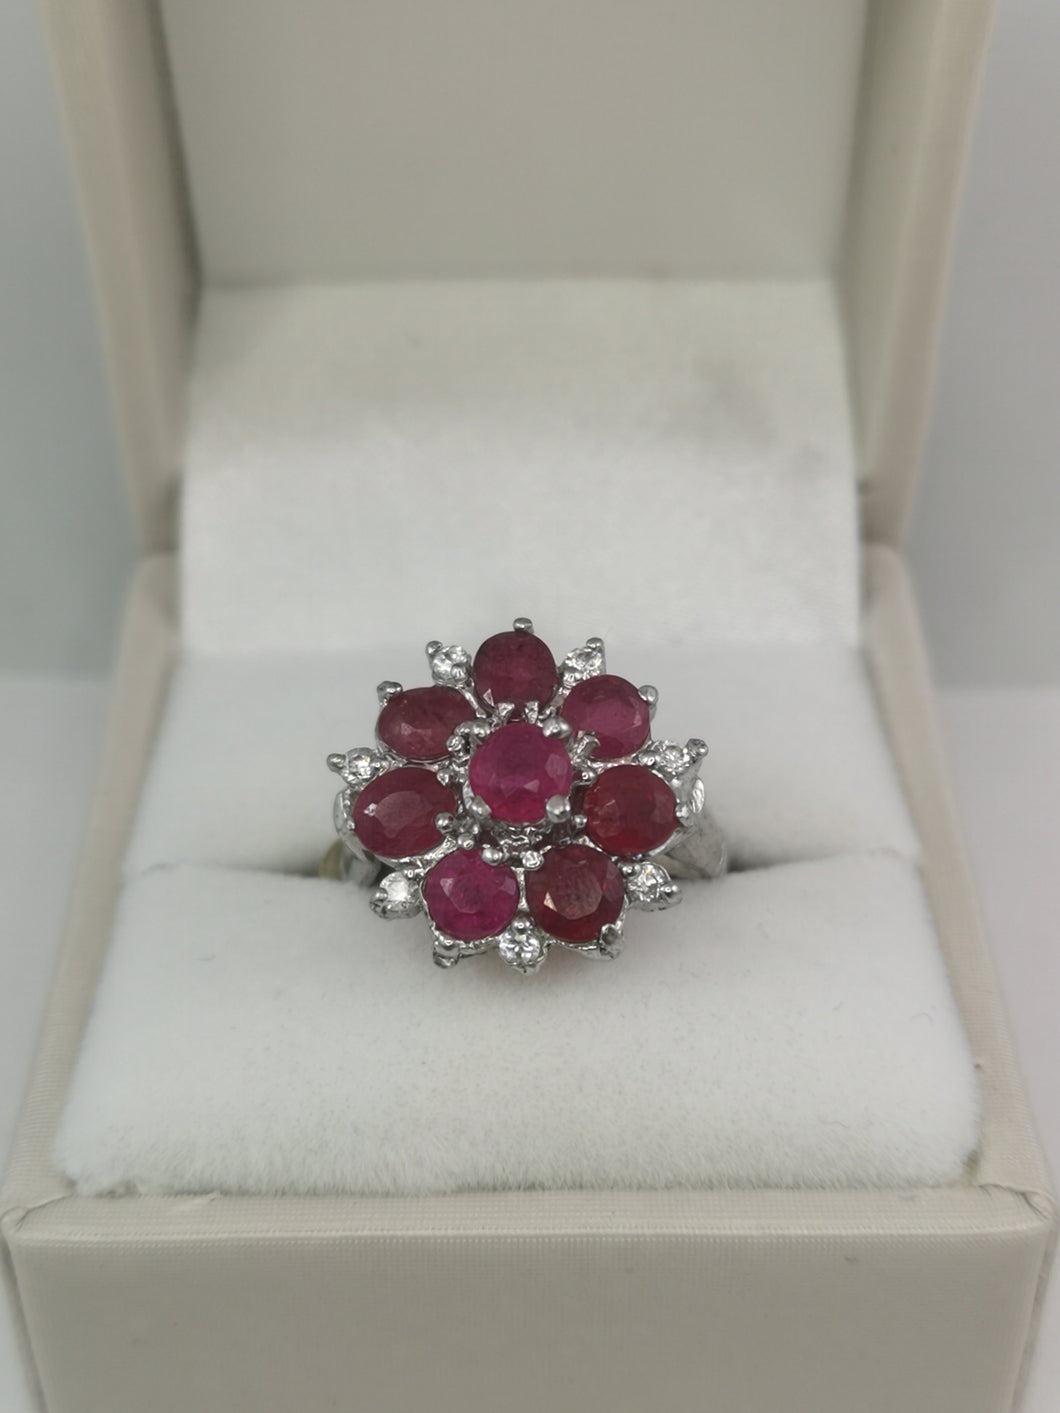 Vintage Styled Genuine Ruby Ring with on 925 Silver